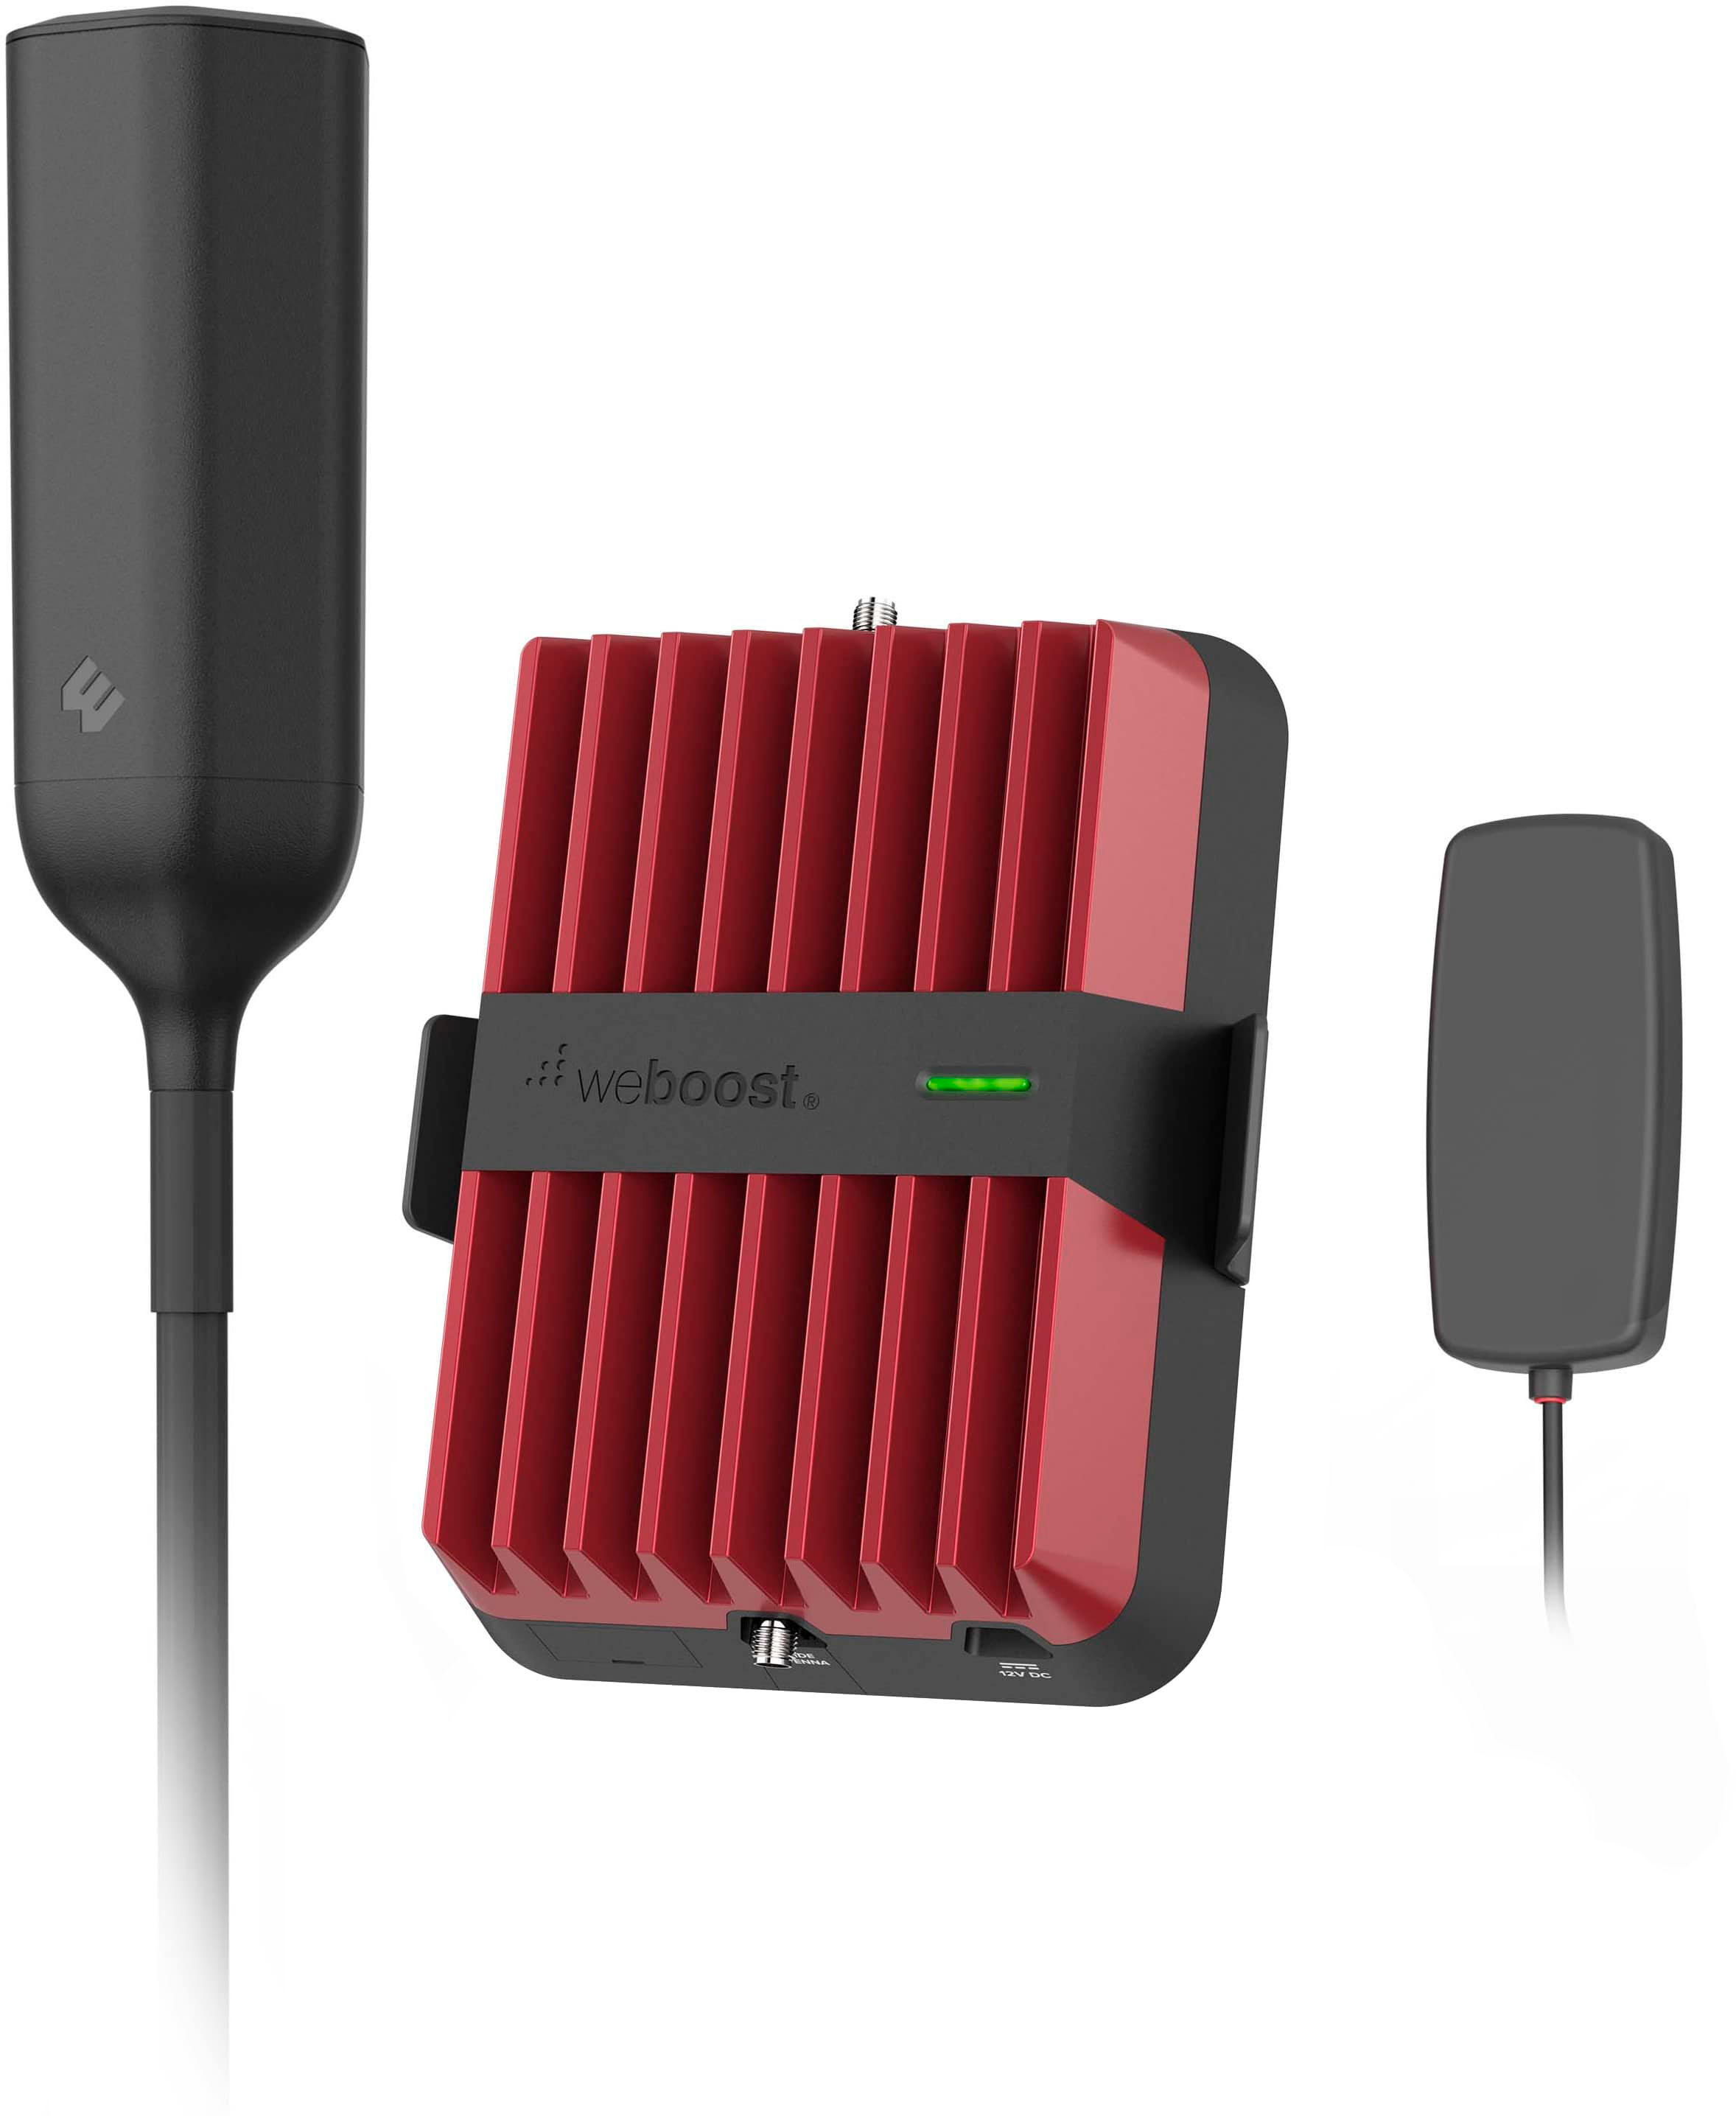 Left View: weBoost Drive Reach OTR, Truck Cell Phone Signal Booster, 5G & 4G LTE, Boosts All U.S. Carriers - Verizon, AT&T, T-Mobile, Magnetic Roof Antenna, FCC Approved (Model 477154)